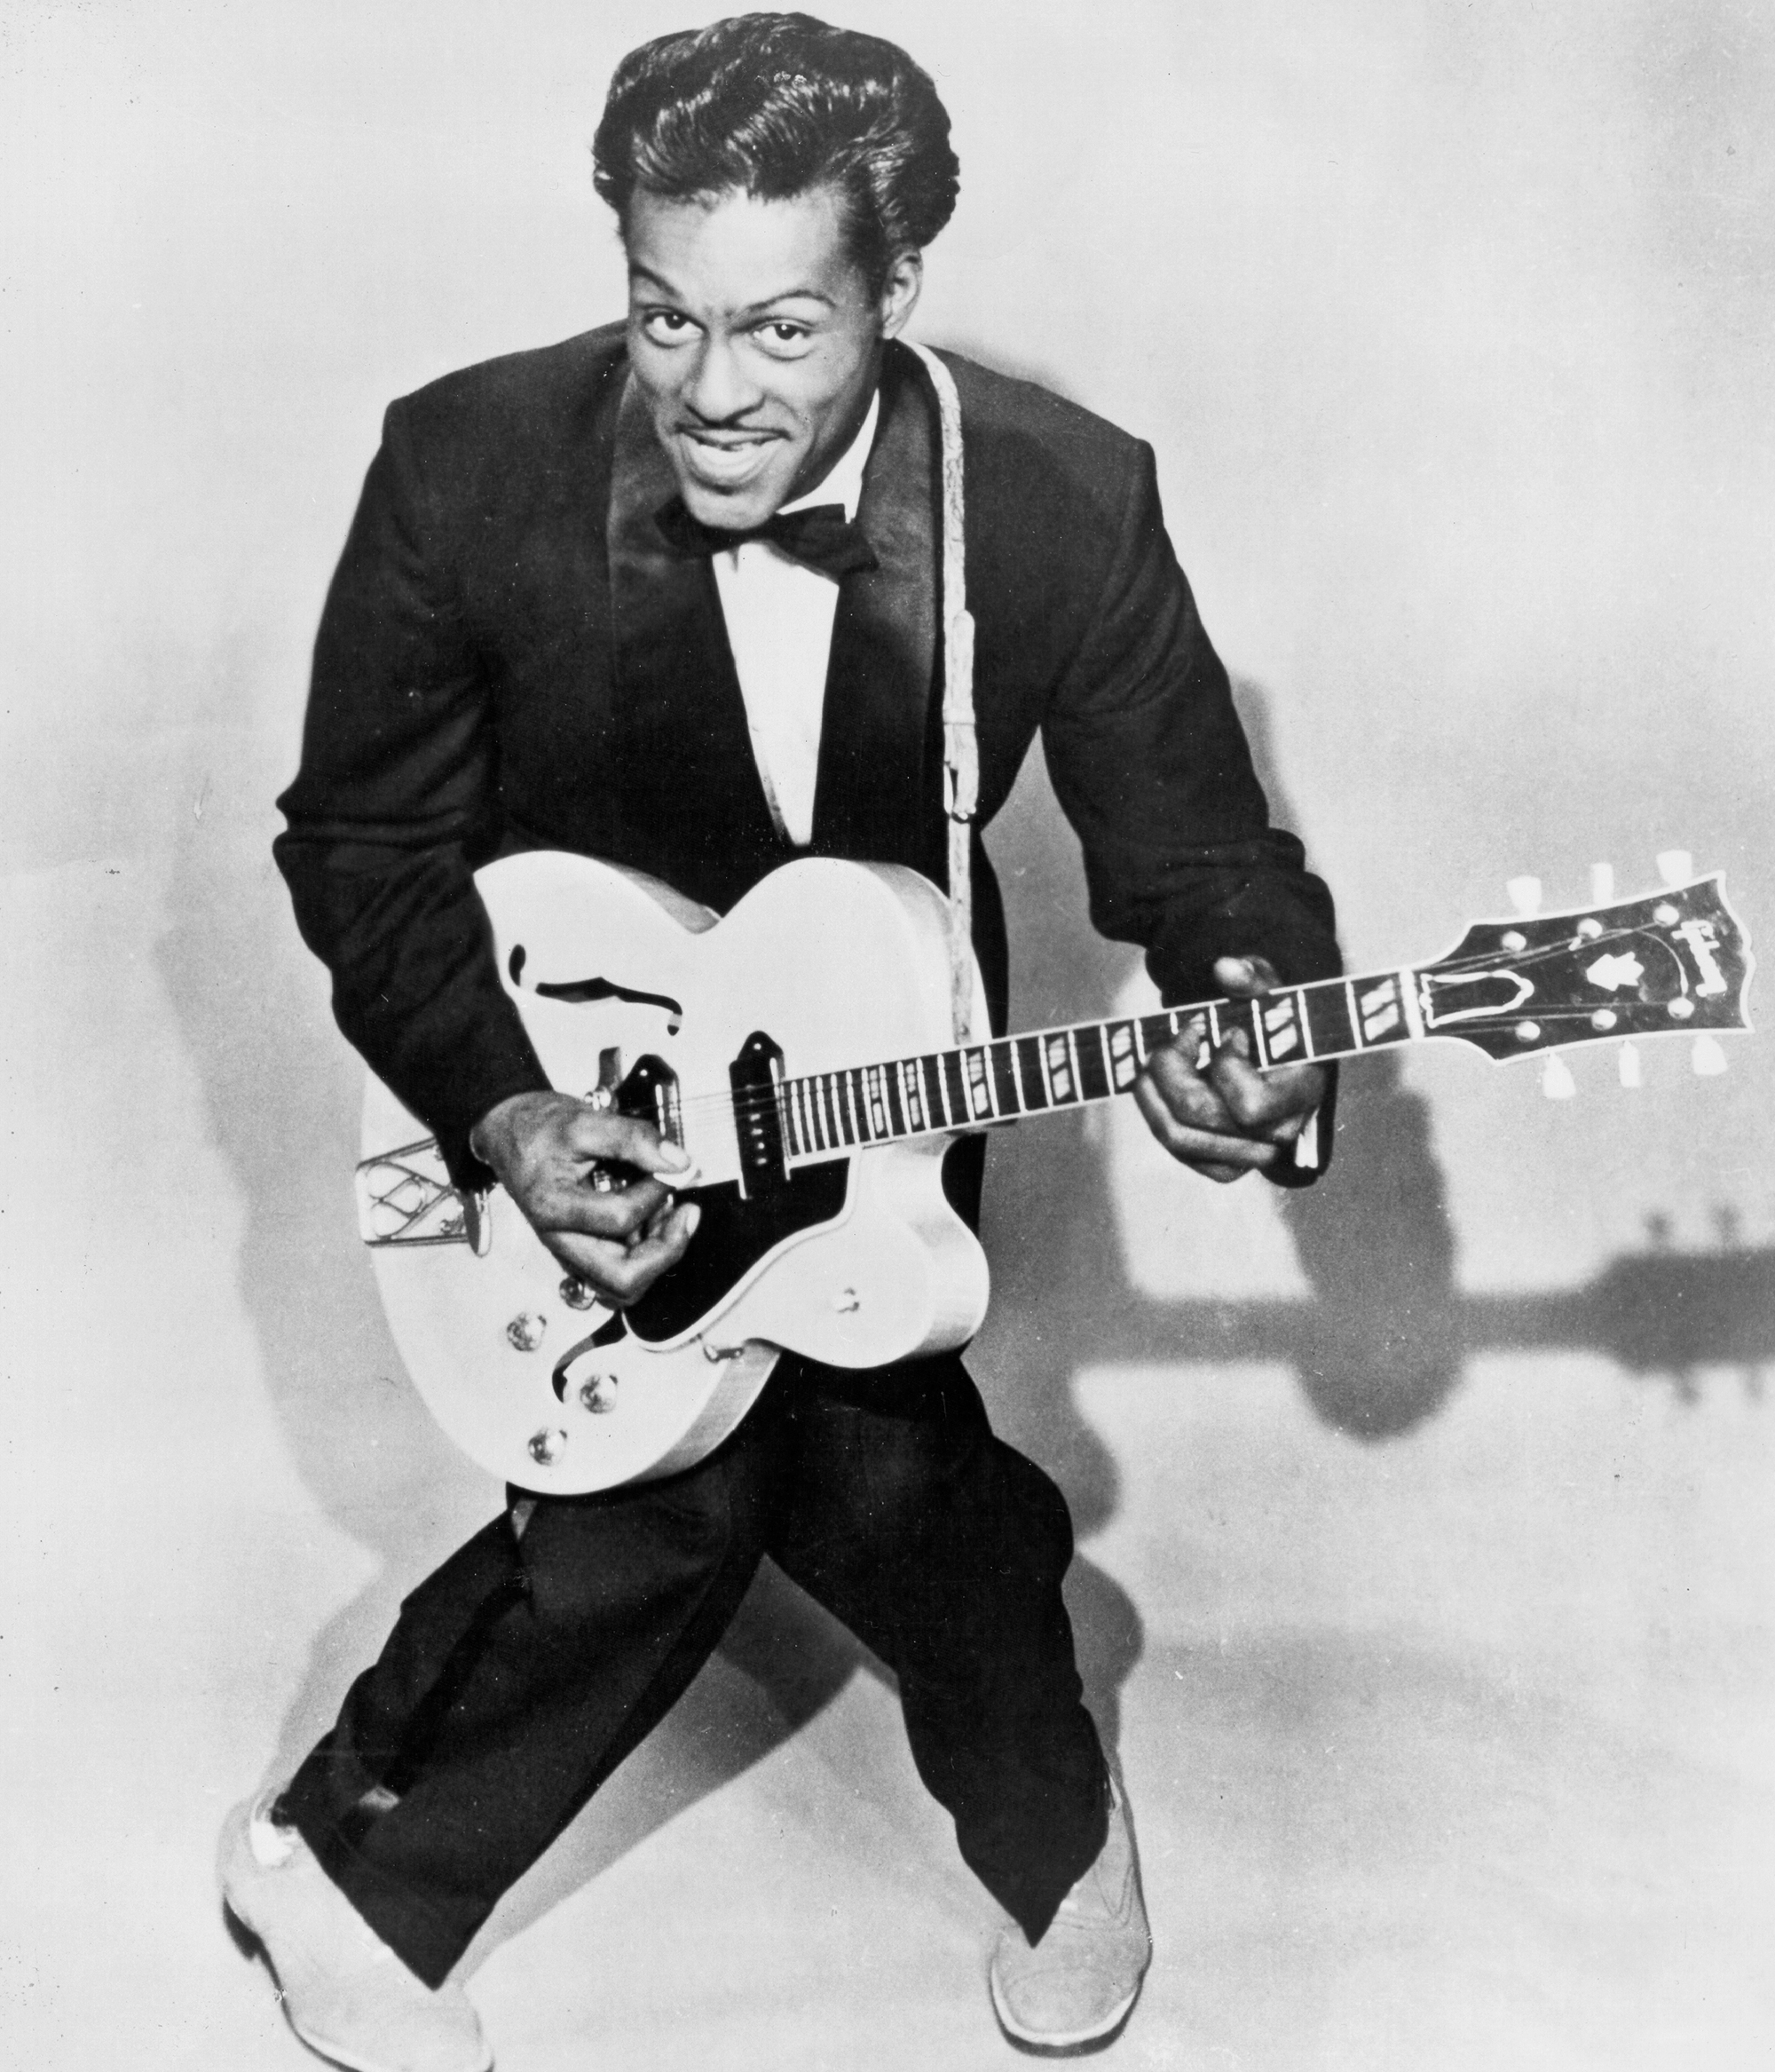 Chuck Berry with his Gibson hollow body electric guitar, c. 1958.